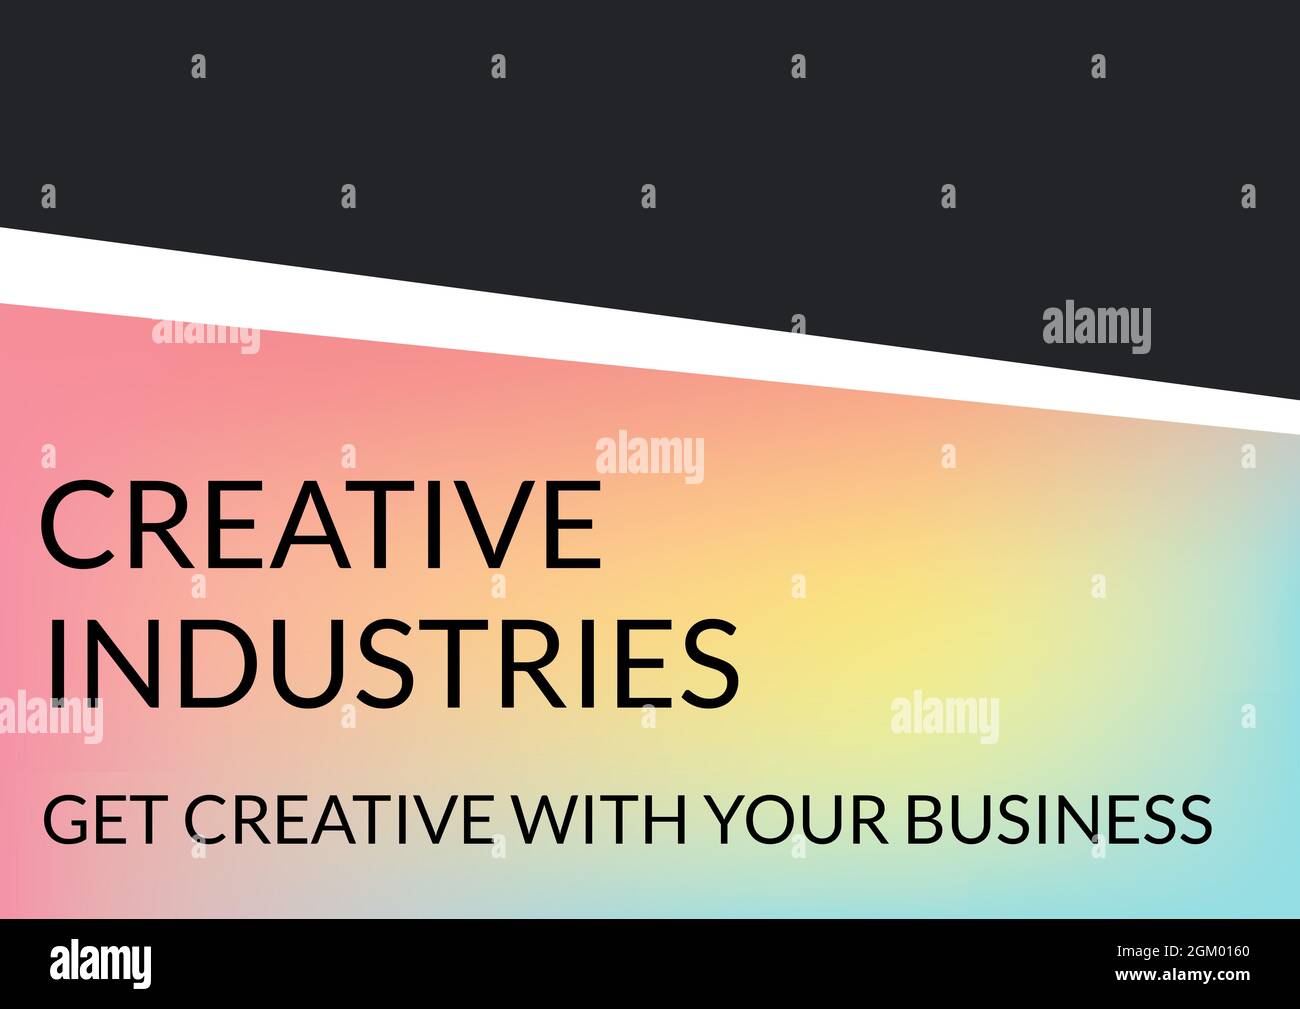 Creative industries text over gradient banner against black background Stock Photo